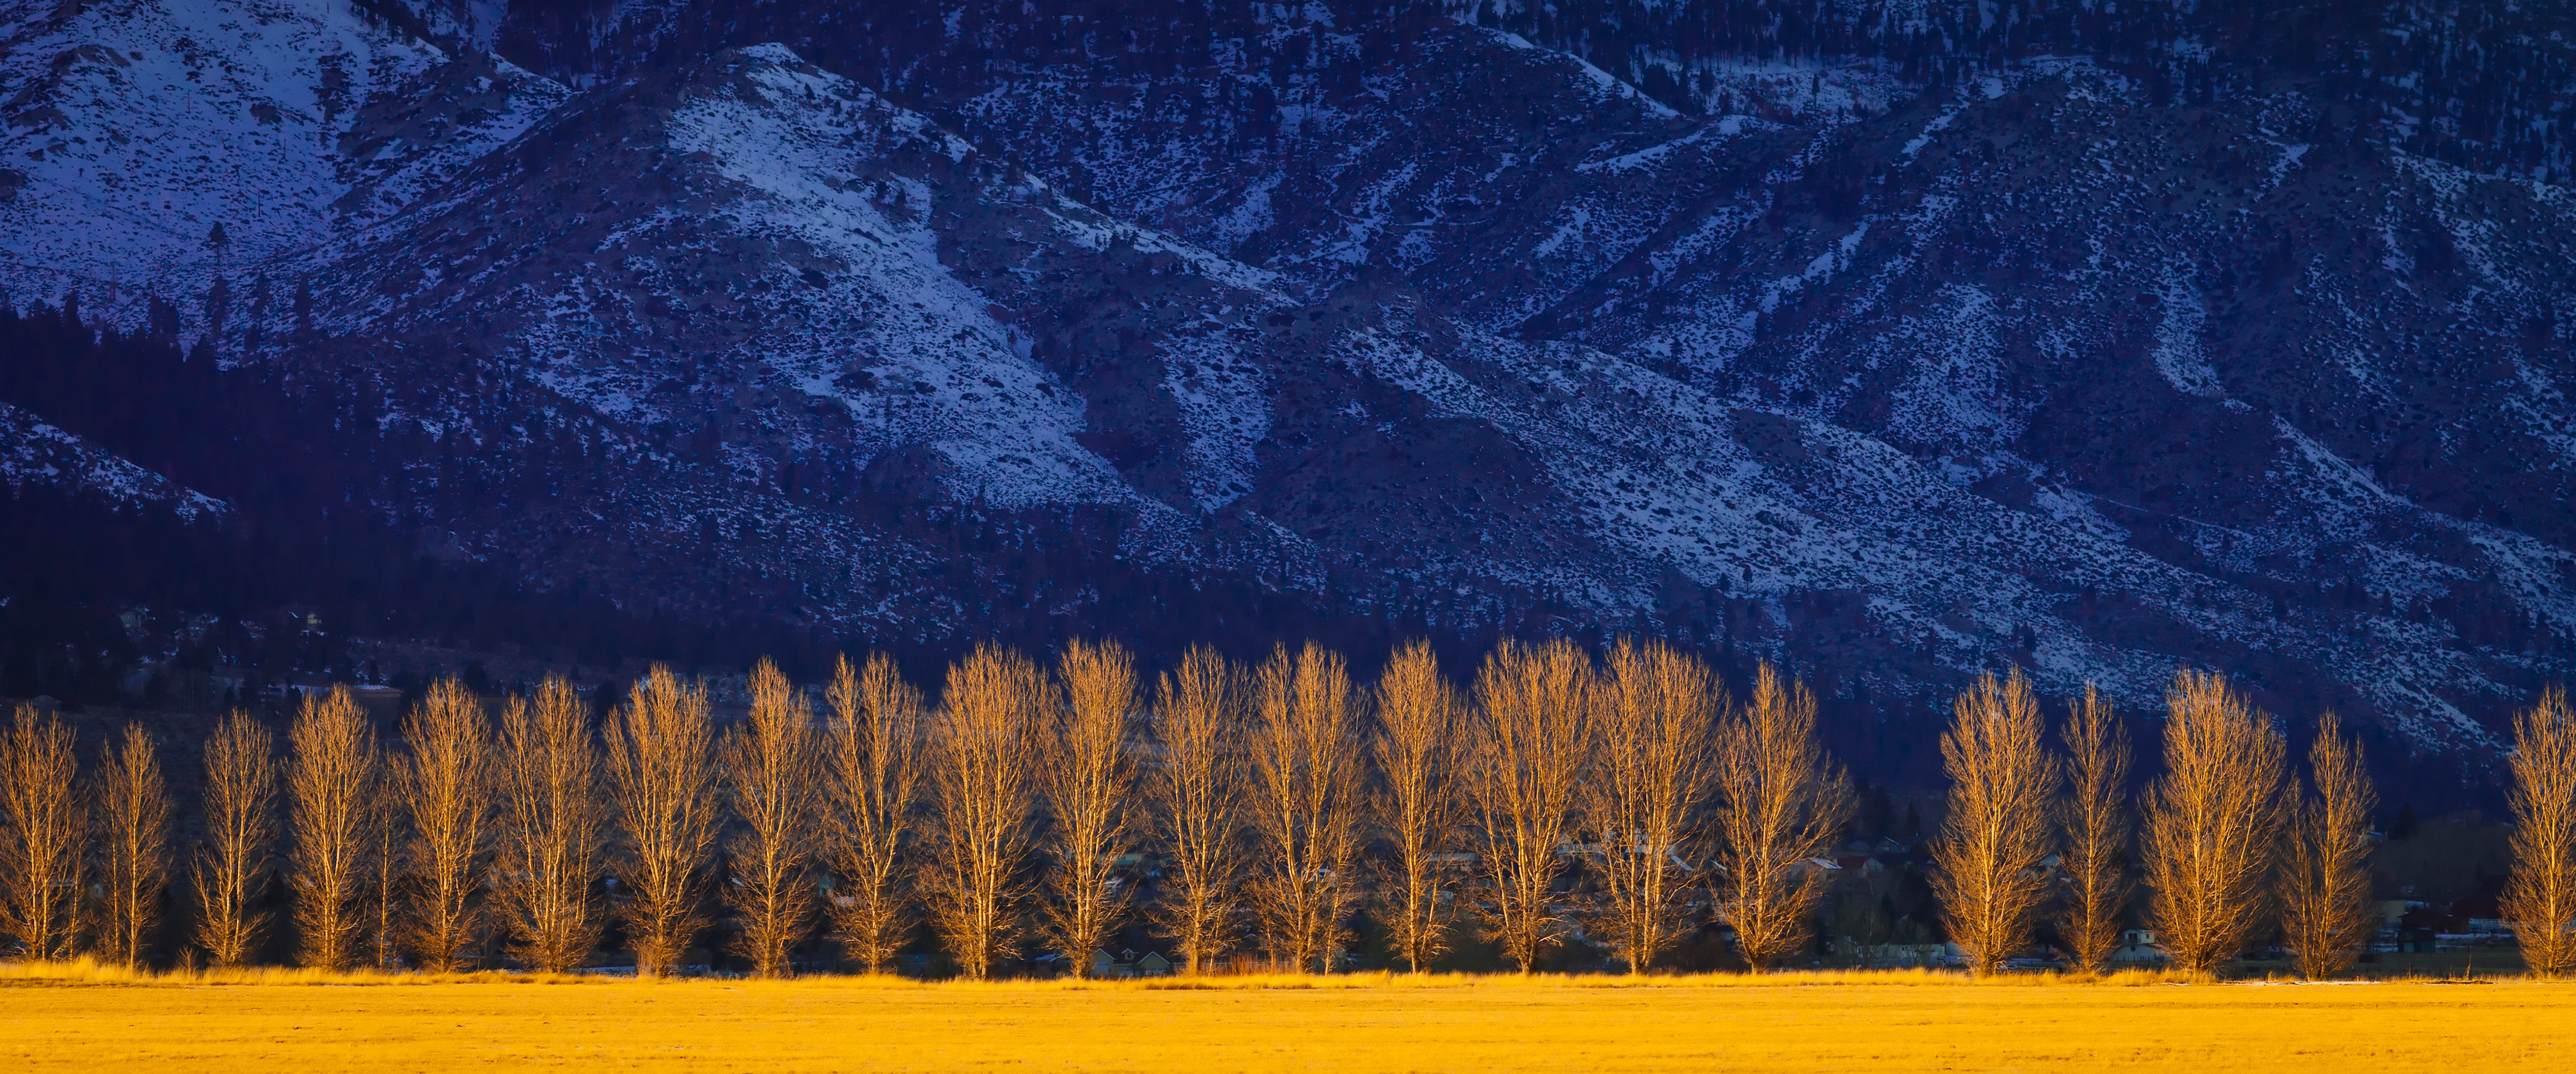 Image of trees and mountains in Douglas County